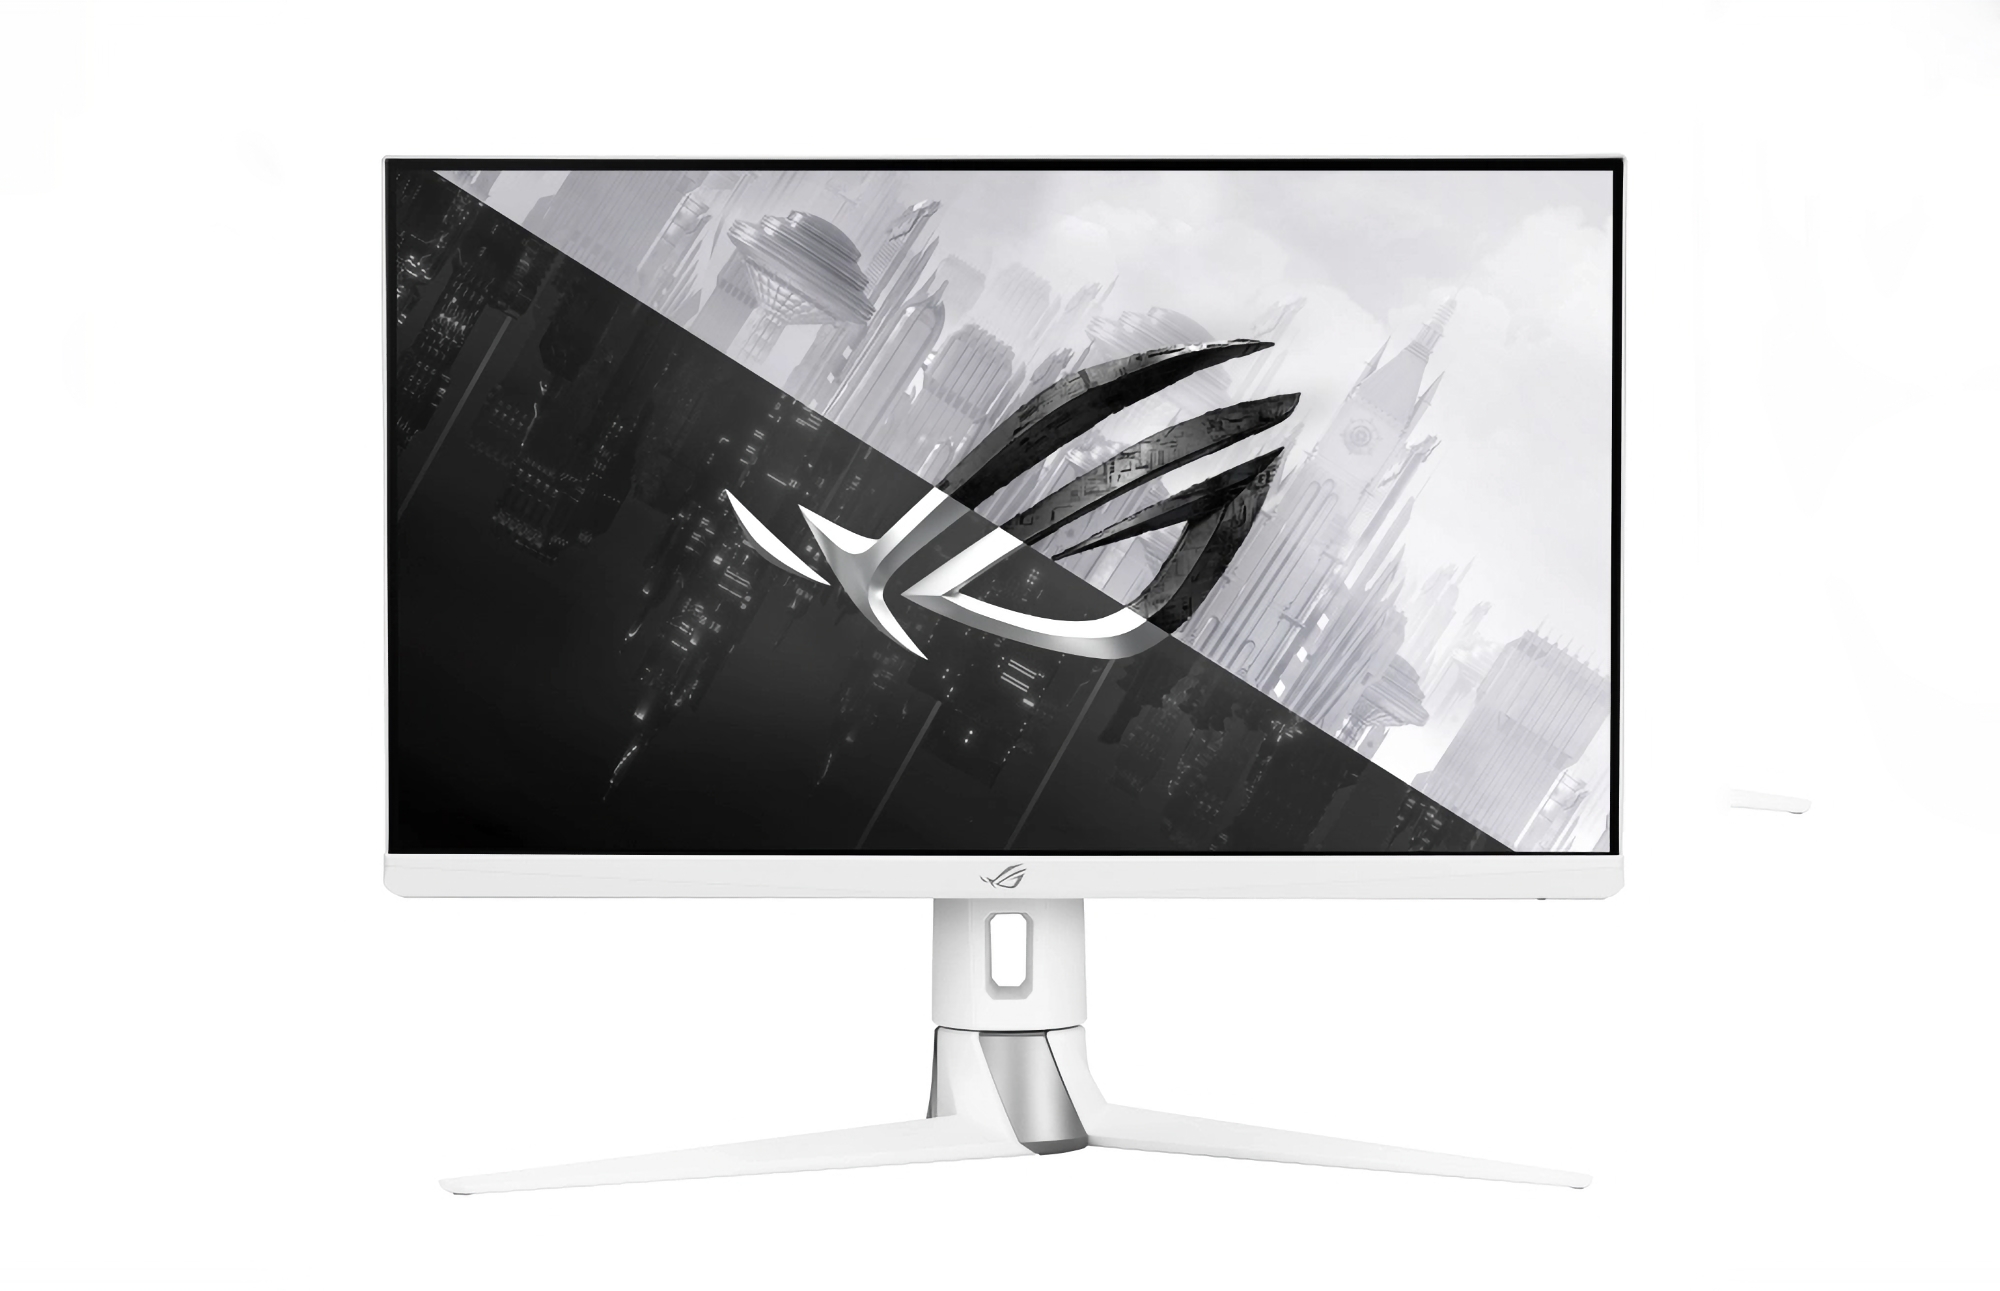 ASUS unveiled the White Edition version of the ROG PG27UQR 4K monitor